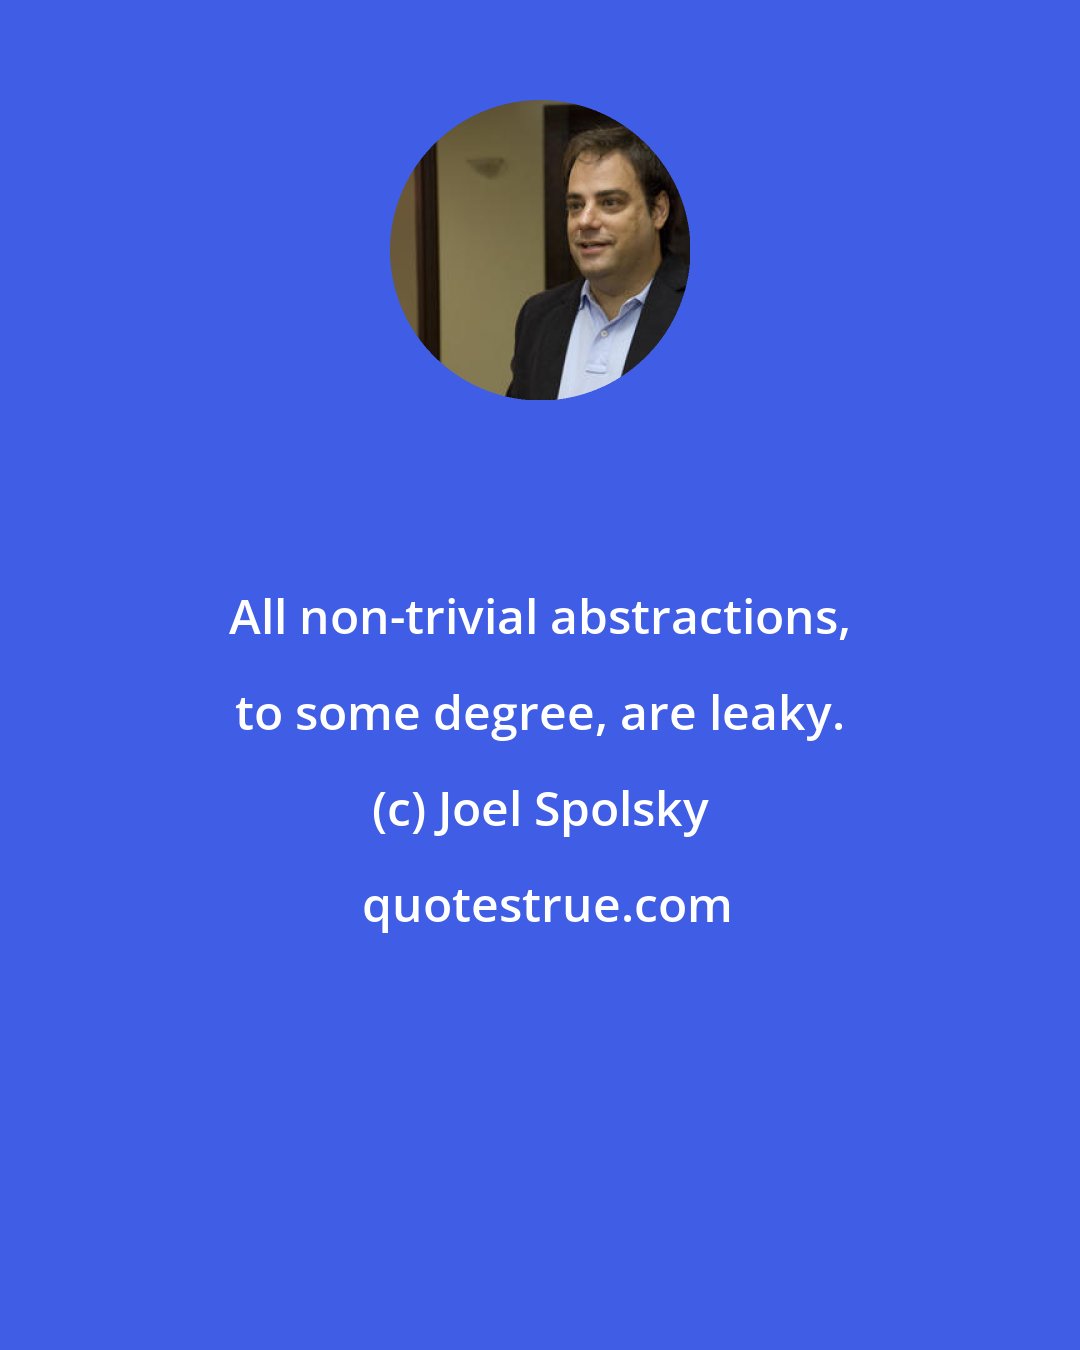 Joel Spolsky: All non-trivial abstractions, to some degree, are leaky.